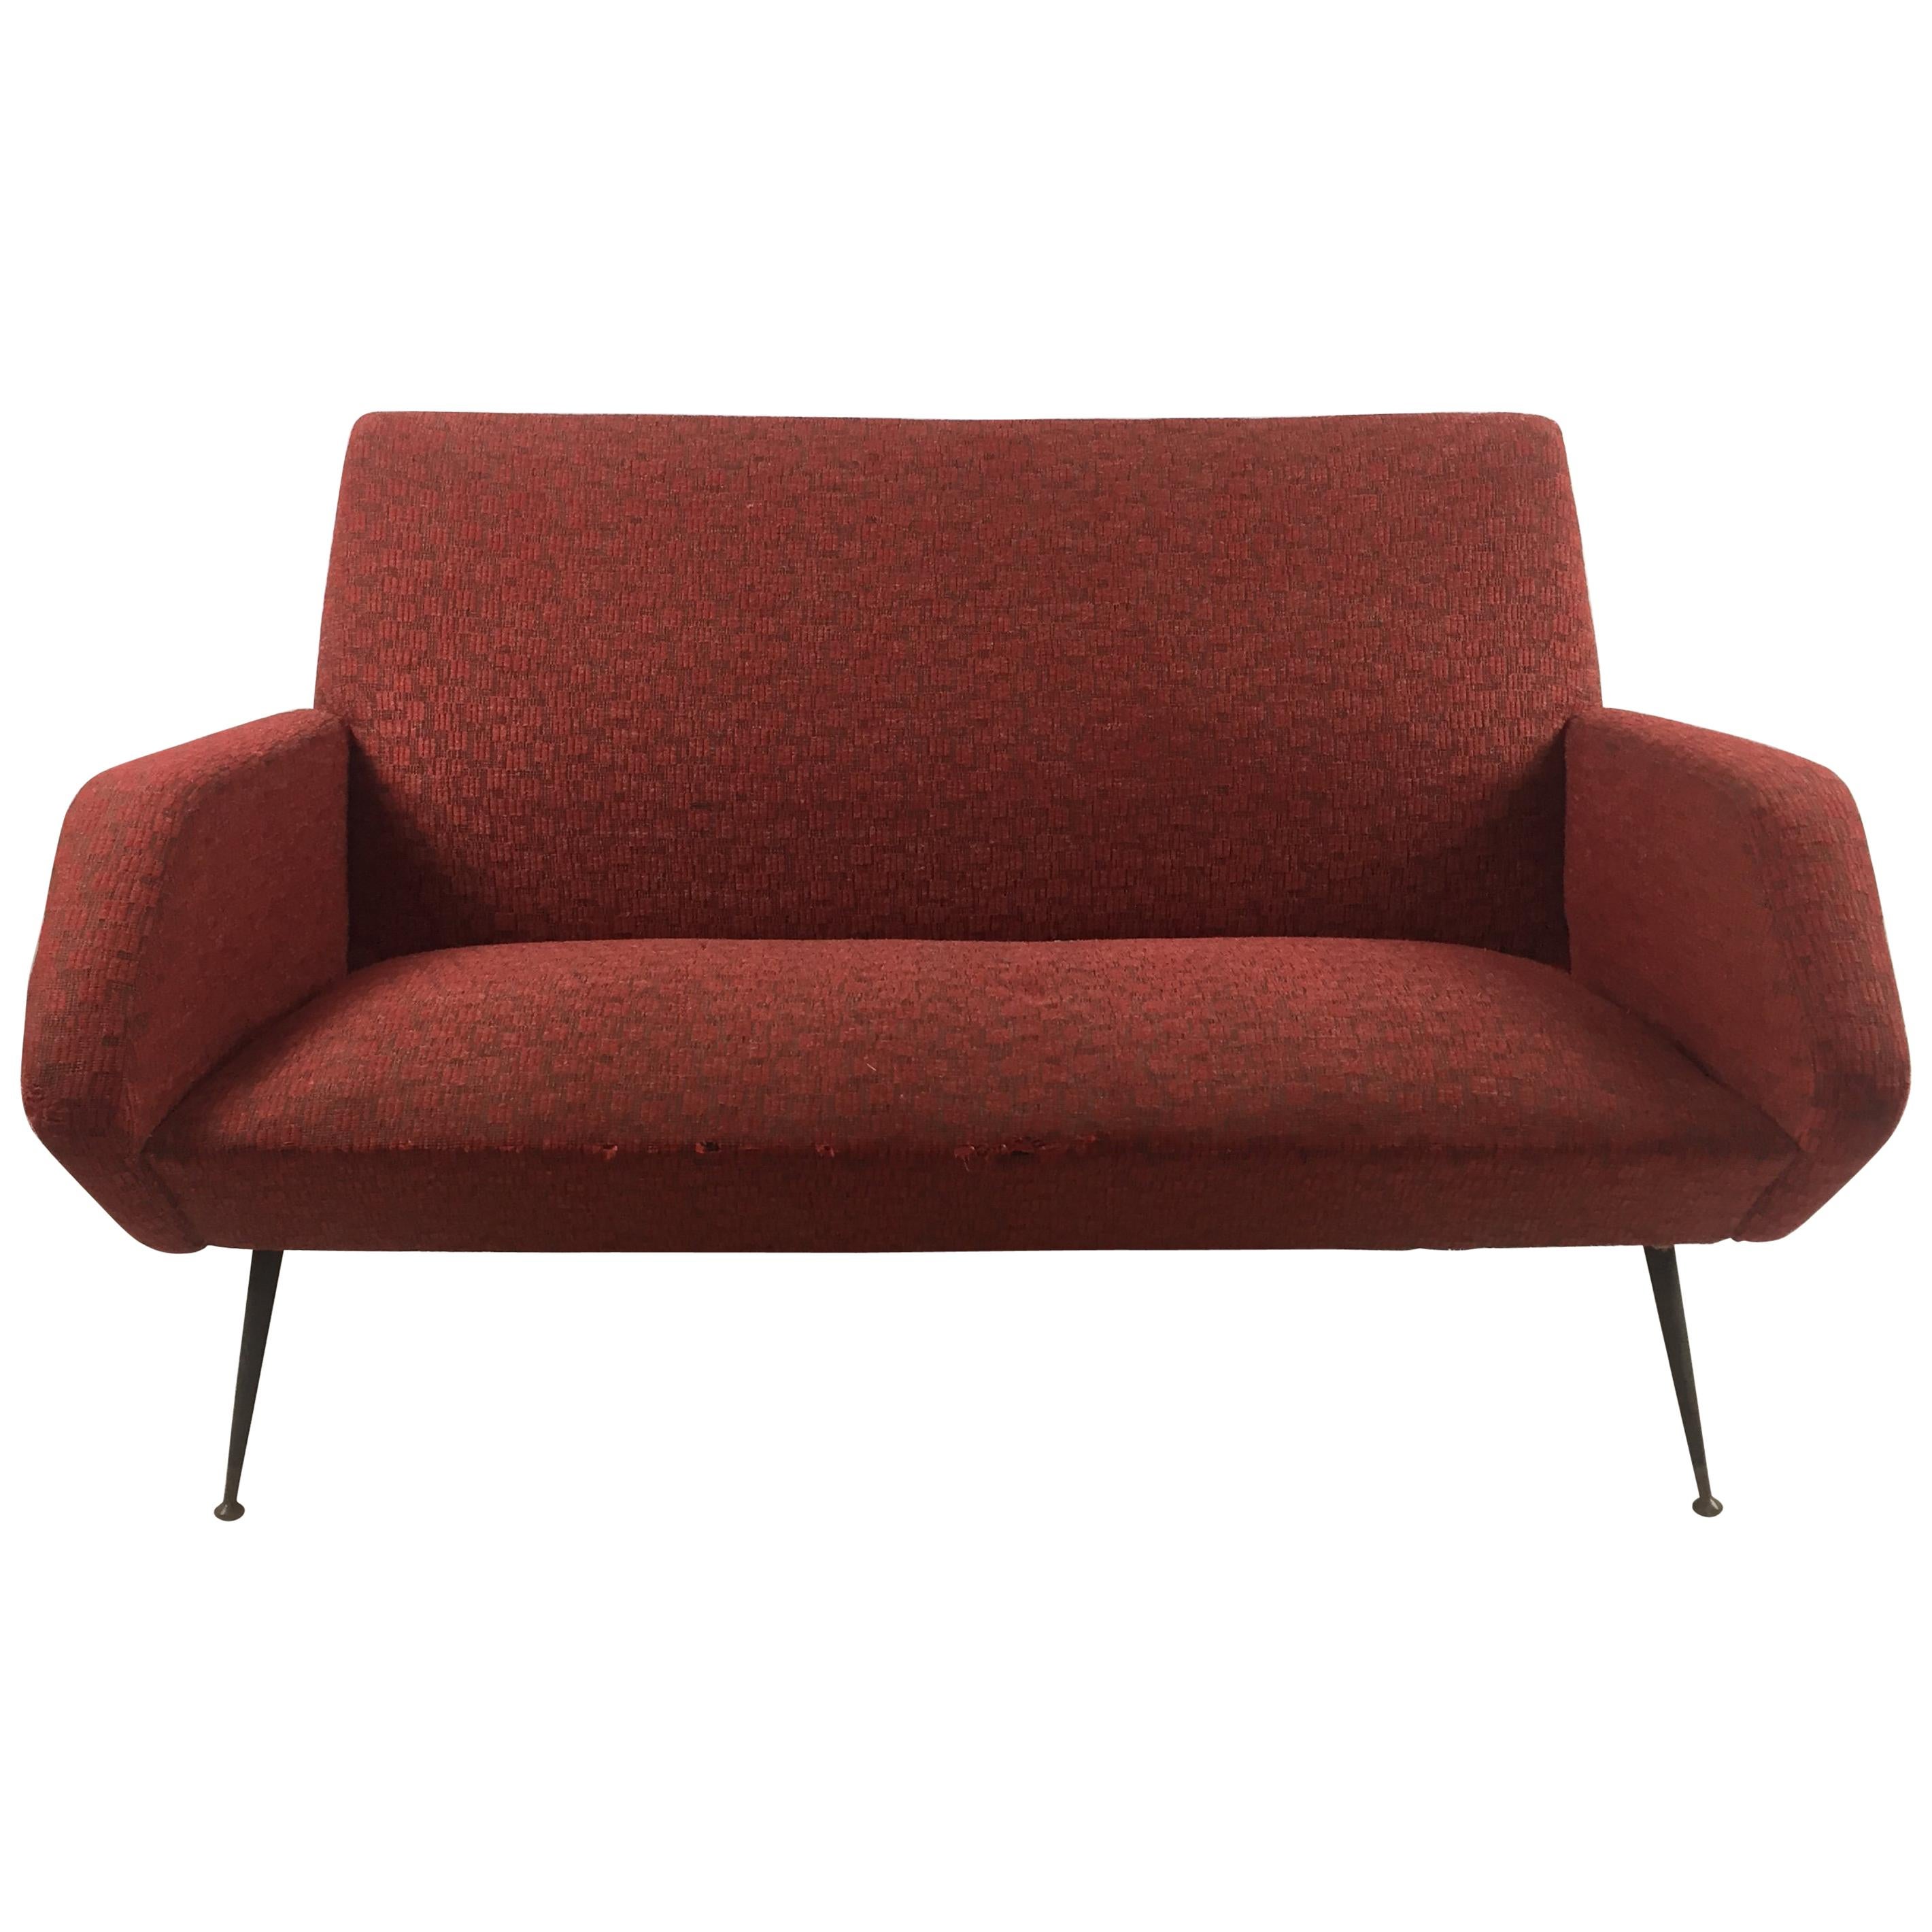 Giò Ponti Style Mid-Century Modern Red Sofa, 1960s For Sale